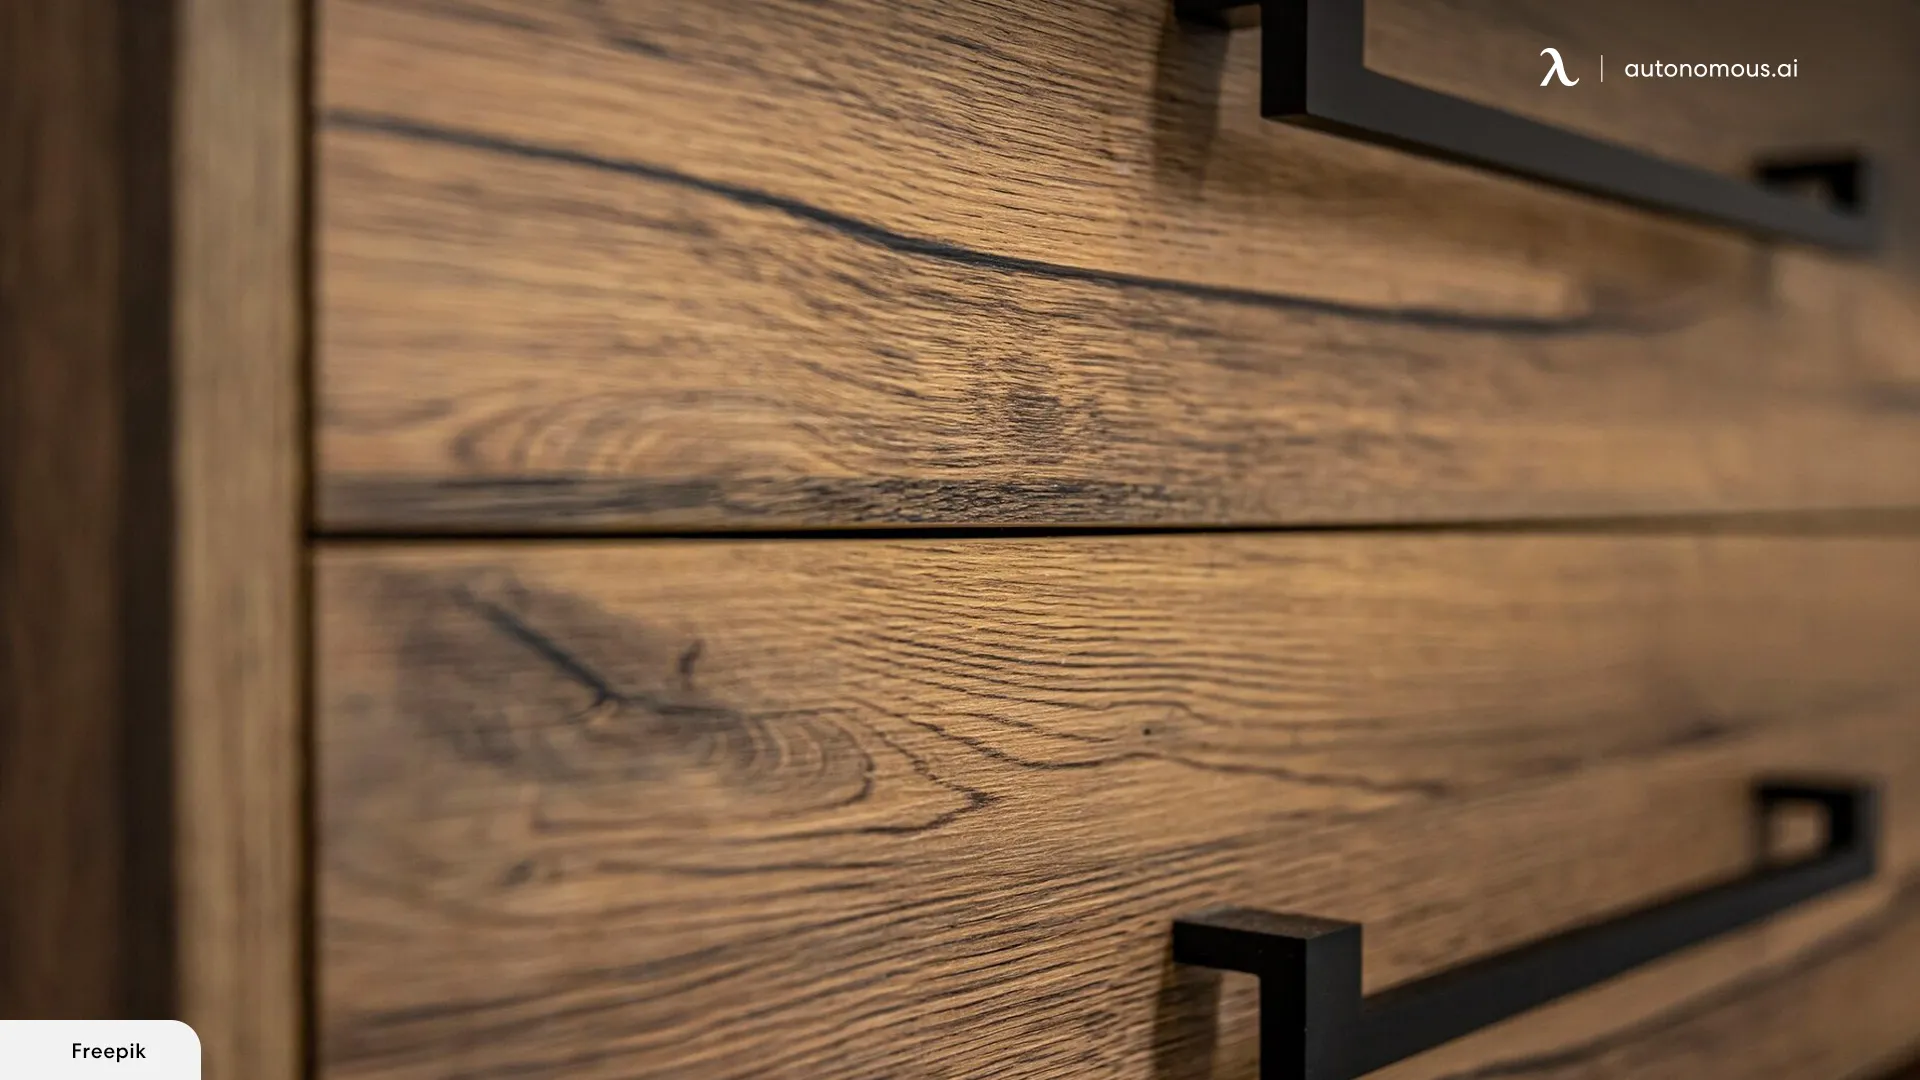 Is Black Mold on Wood Furniture Dangerous? What You Need to Know